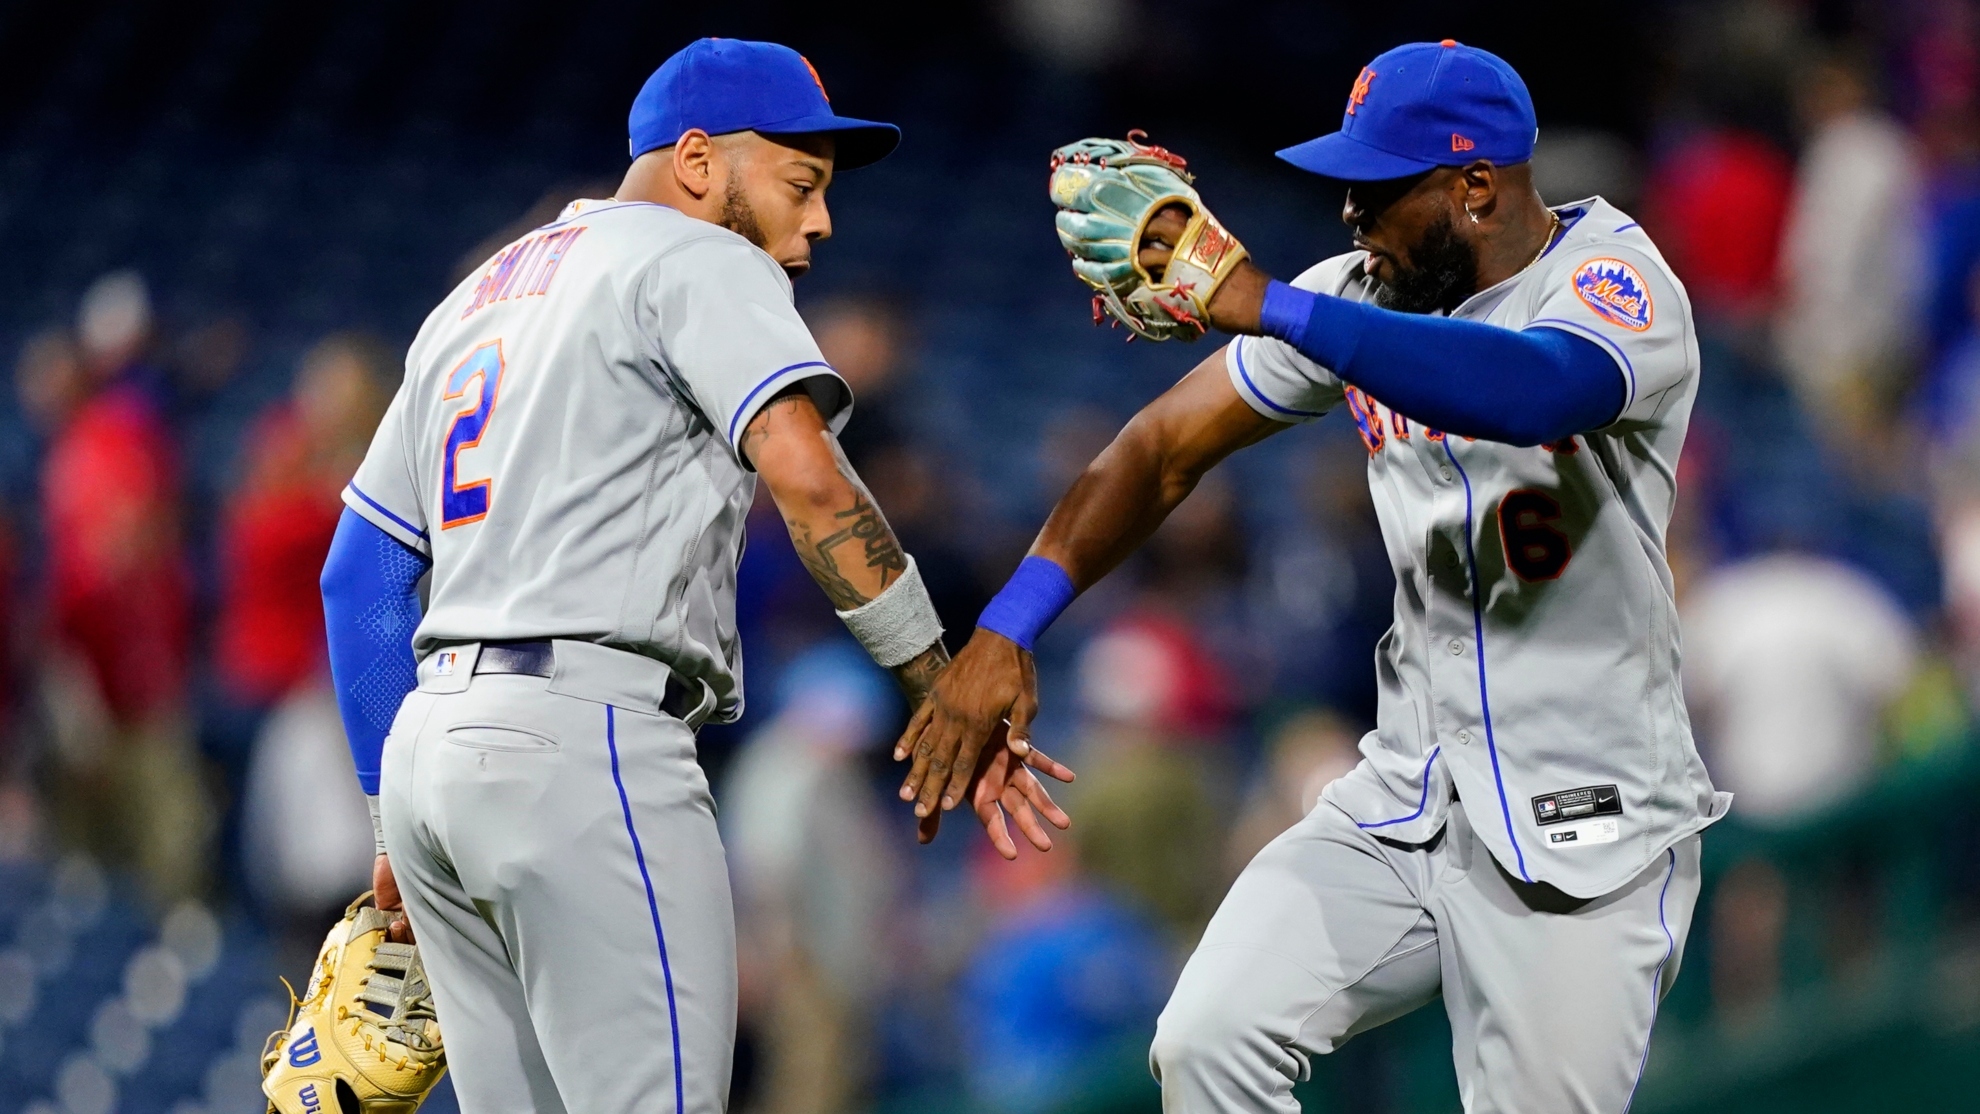 New York Mets' Dominic Smith and Starling Marte celebrate after a baseball game against the Phillies,